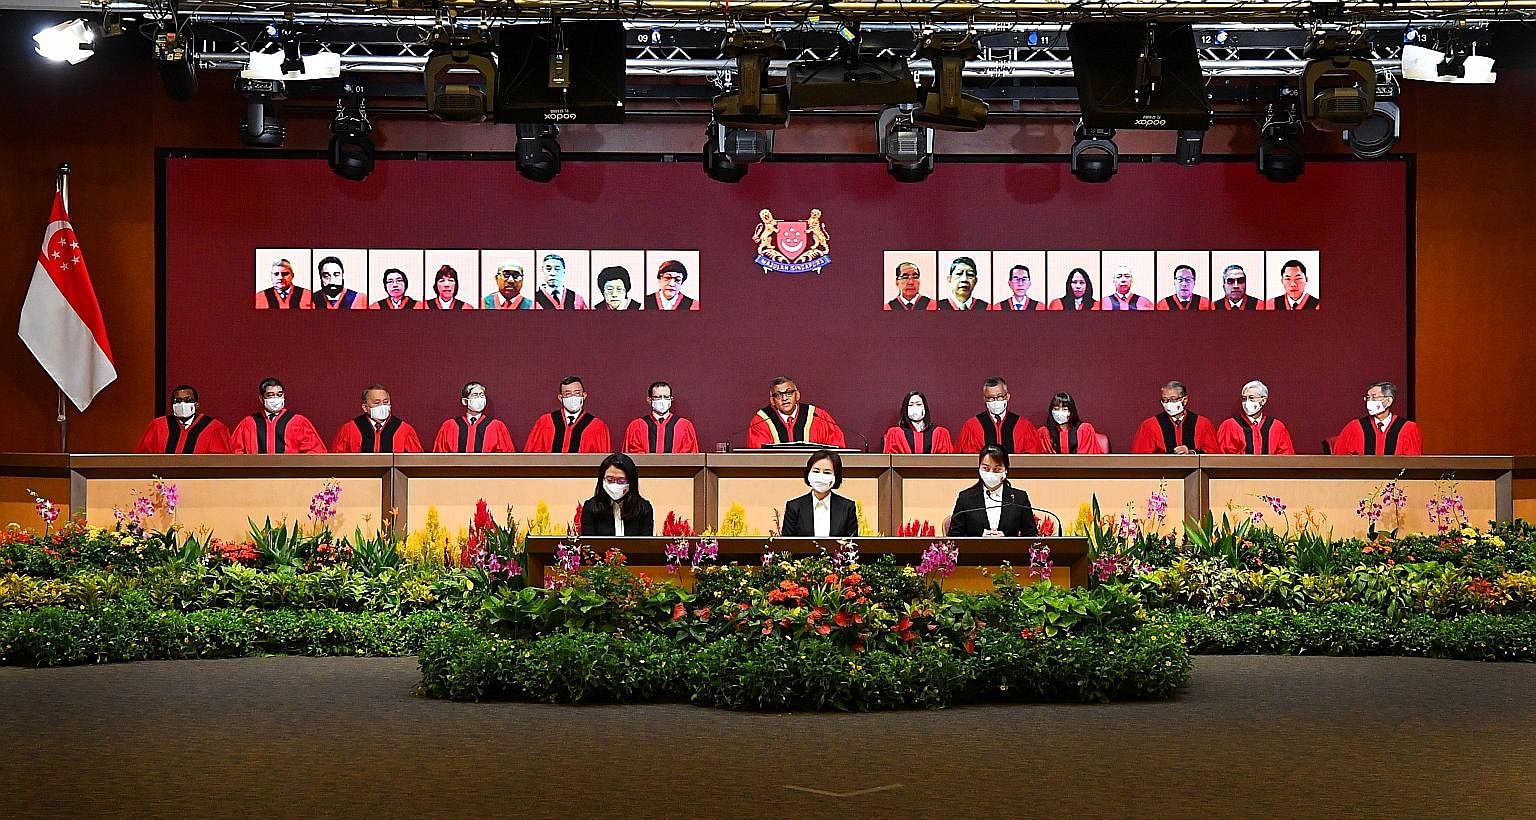 Chief Justice Sundaresh Menon (centre) delivering a speech to mark the opening of the legal year. The event was conducted virtually for the first time, with the proceedings live-streamed to about 1,000 participants.